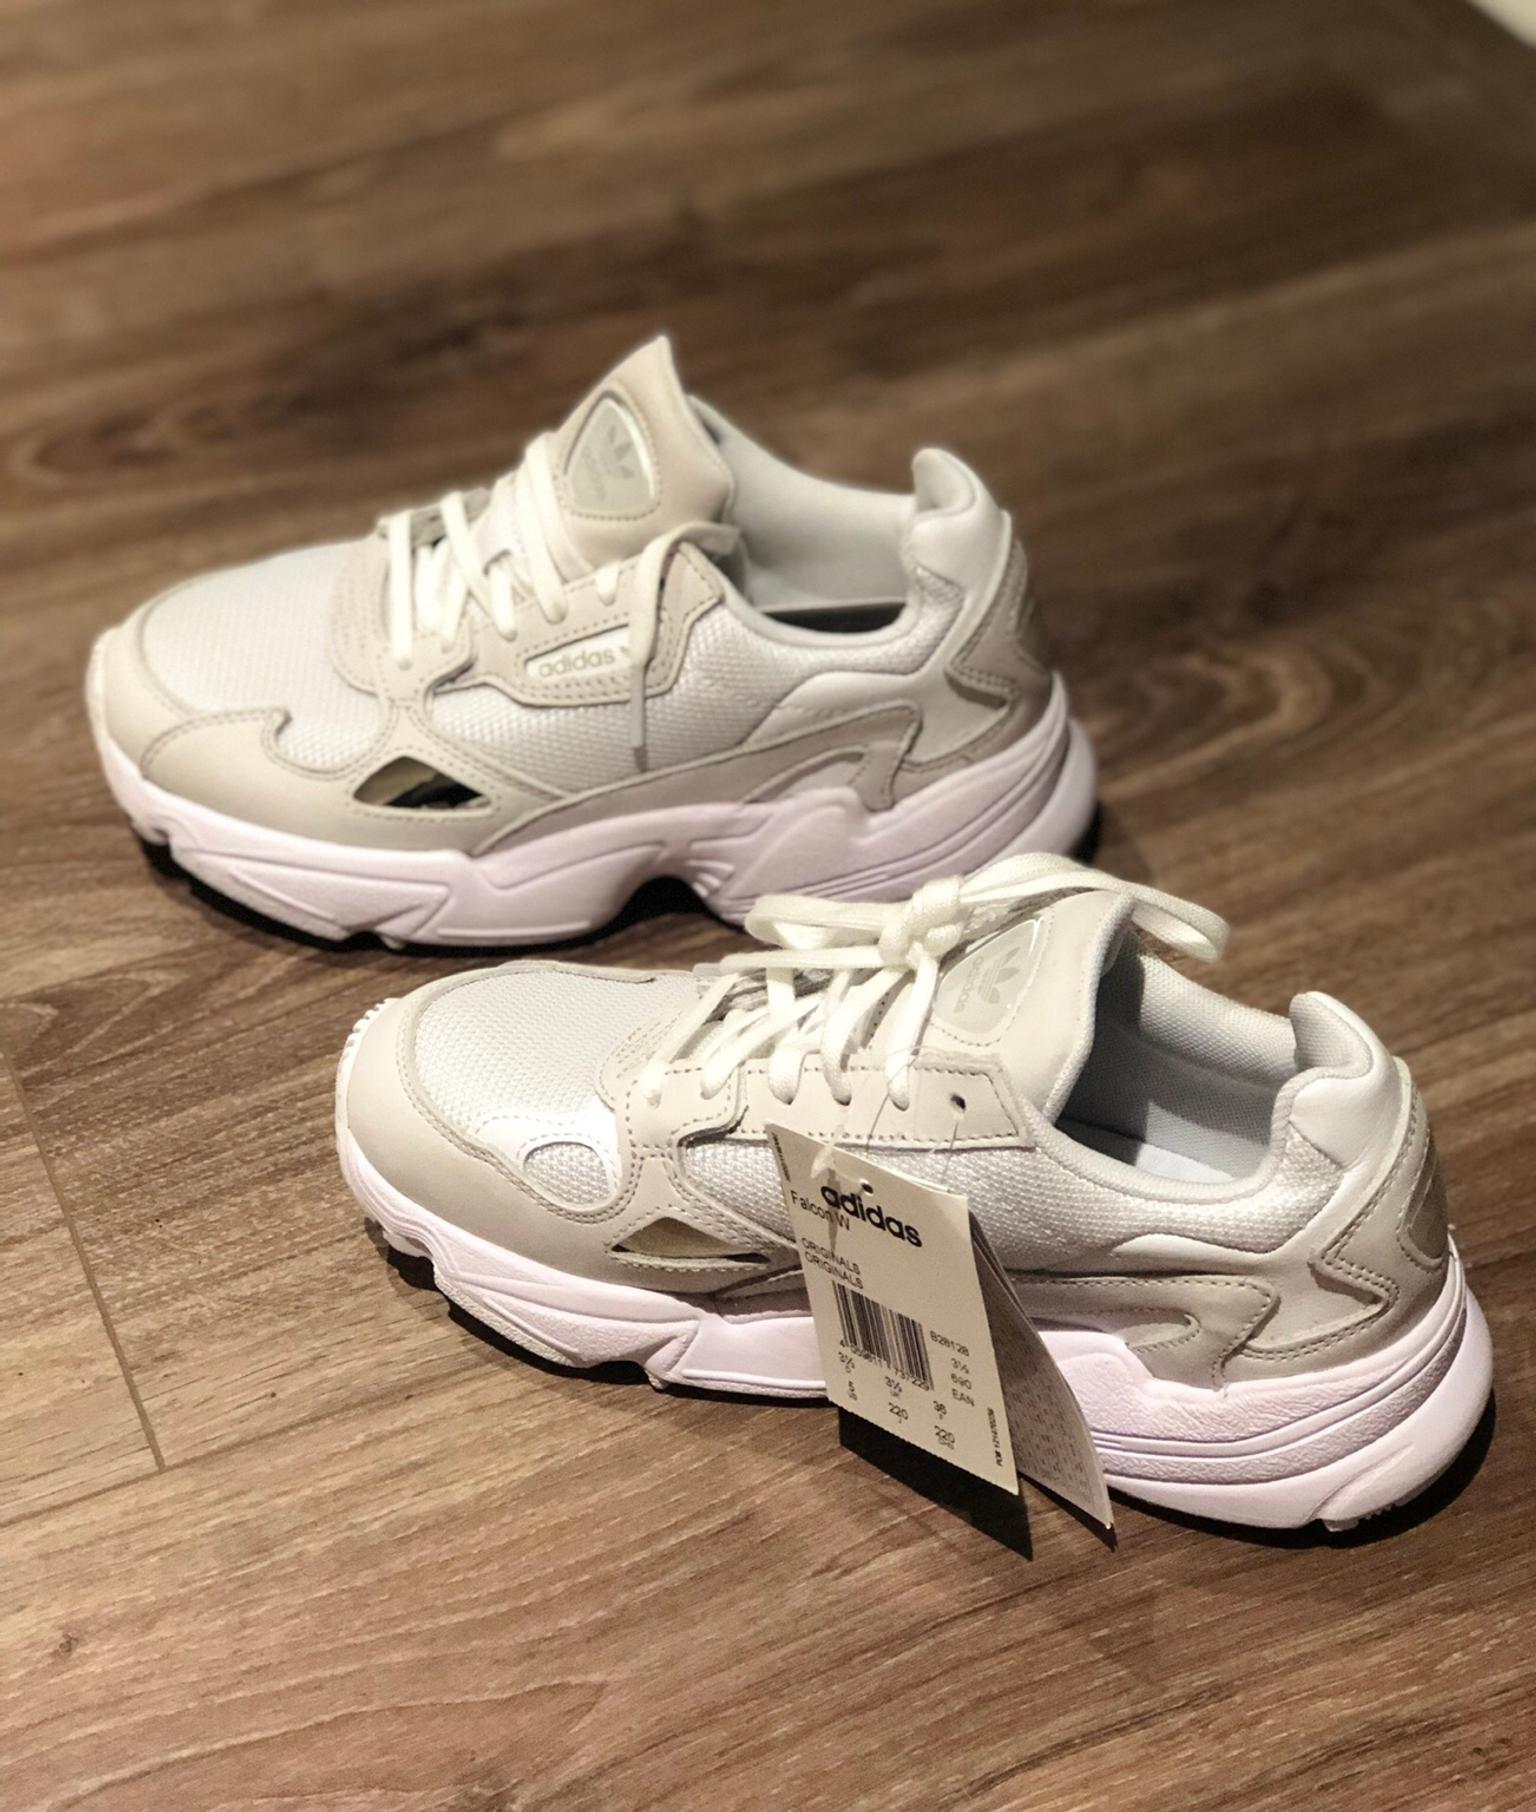 Adidas Falcon Size EUR 36 / UK 3.5 in 